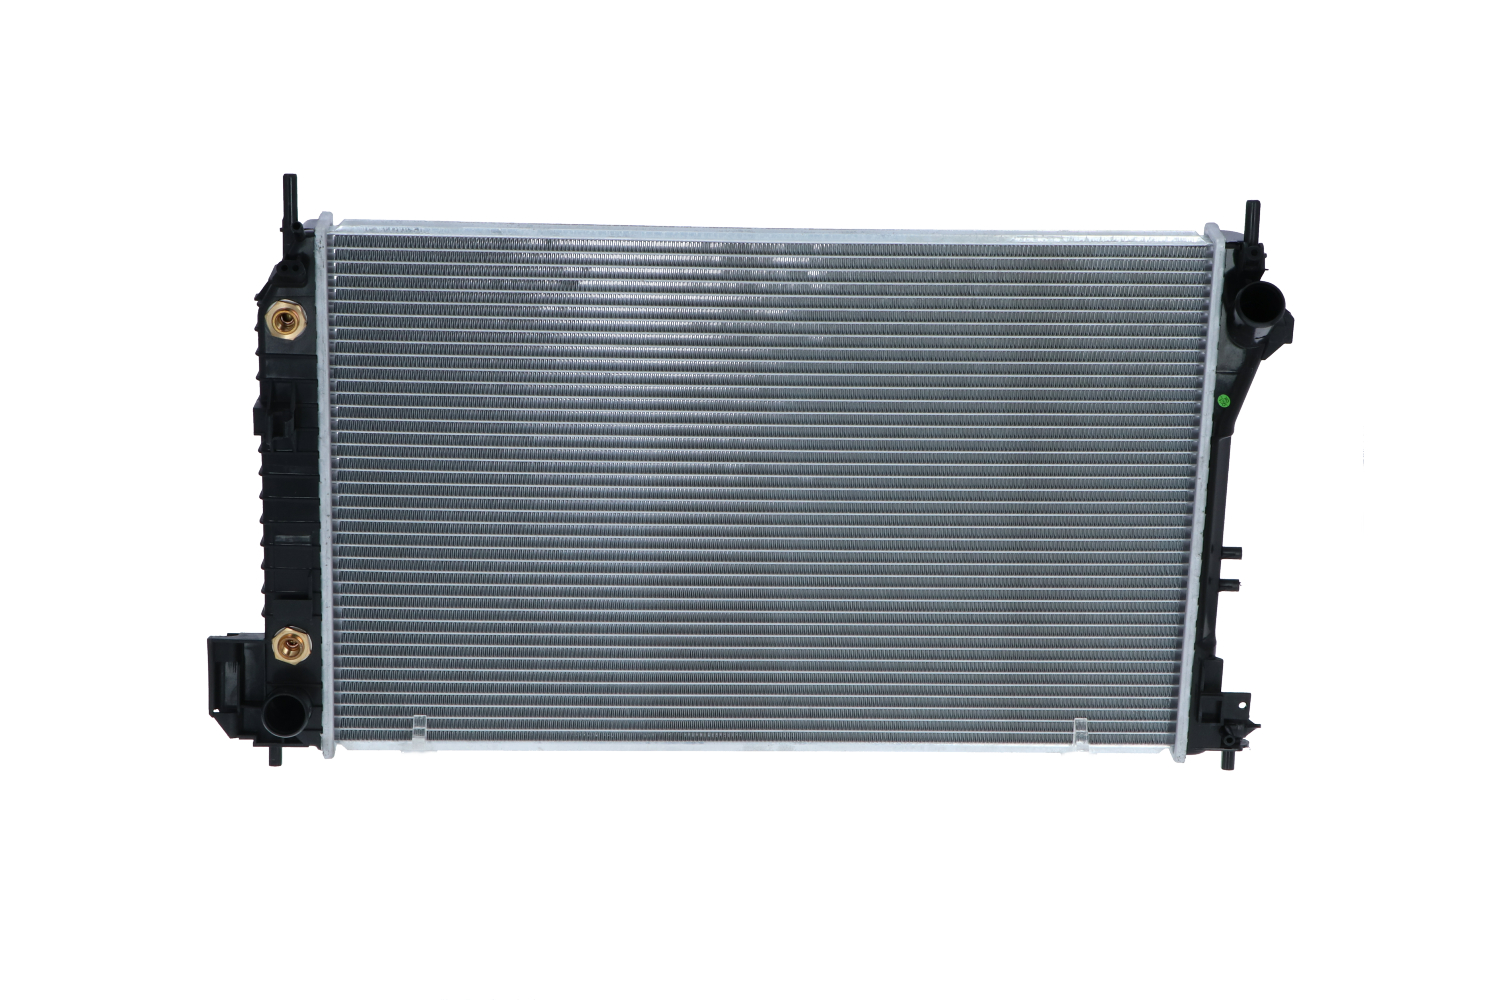 NRF 58294 Engine radiator Aluminium, 650 x 398 x 26 mm, with seal ring, Brazed cooling fins